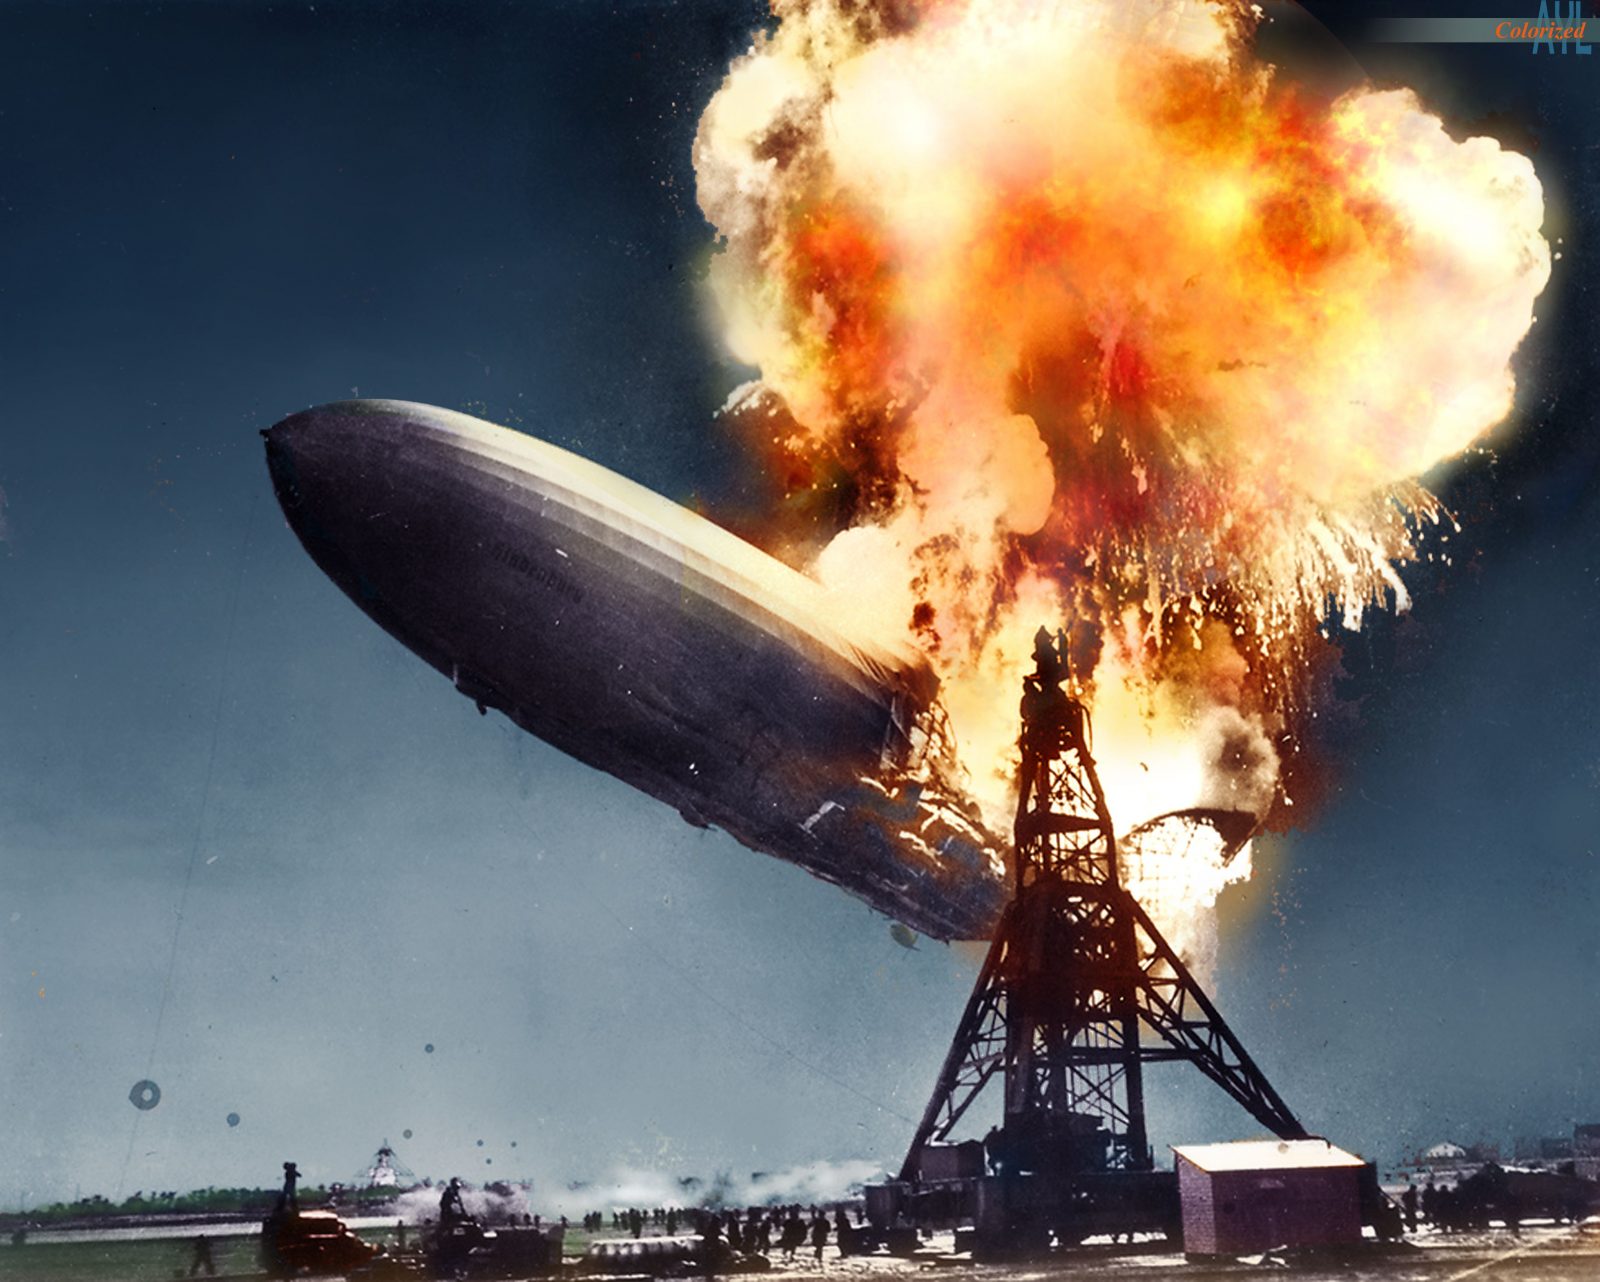 This IQ Quiz Should Be Easy but Can You Get a Perfect Score? Hindenburg Disaster